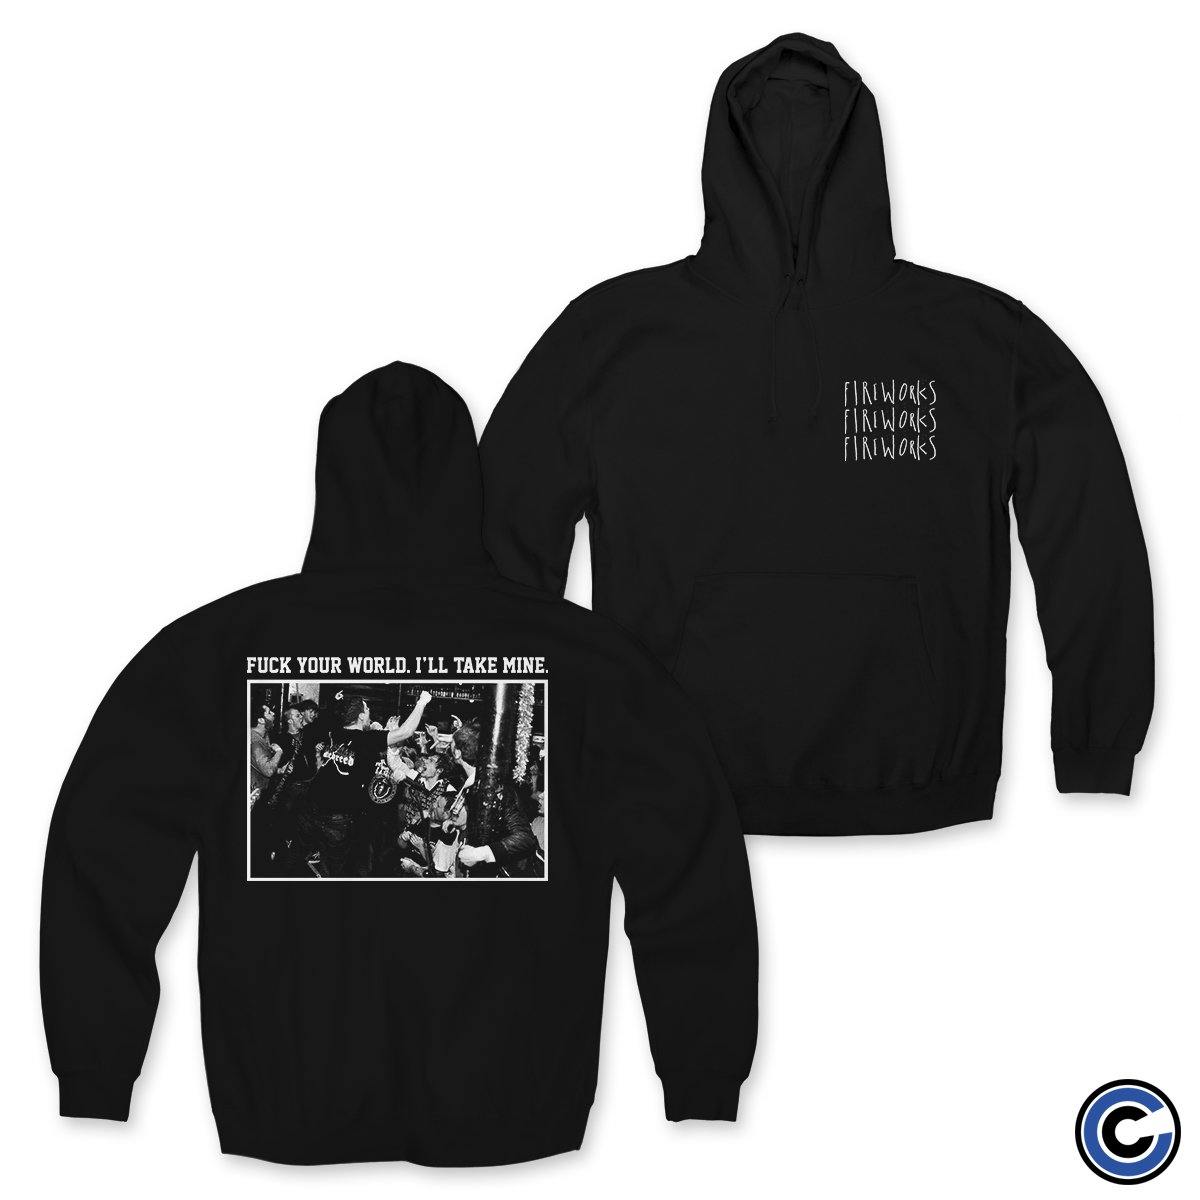 Buy – Fireworks "Live" Hoodie – Band & Music Merch – Cold Cuts Merch